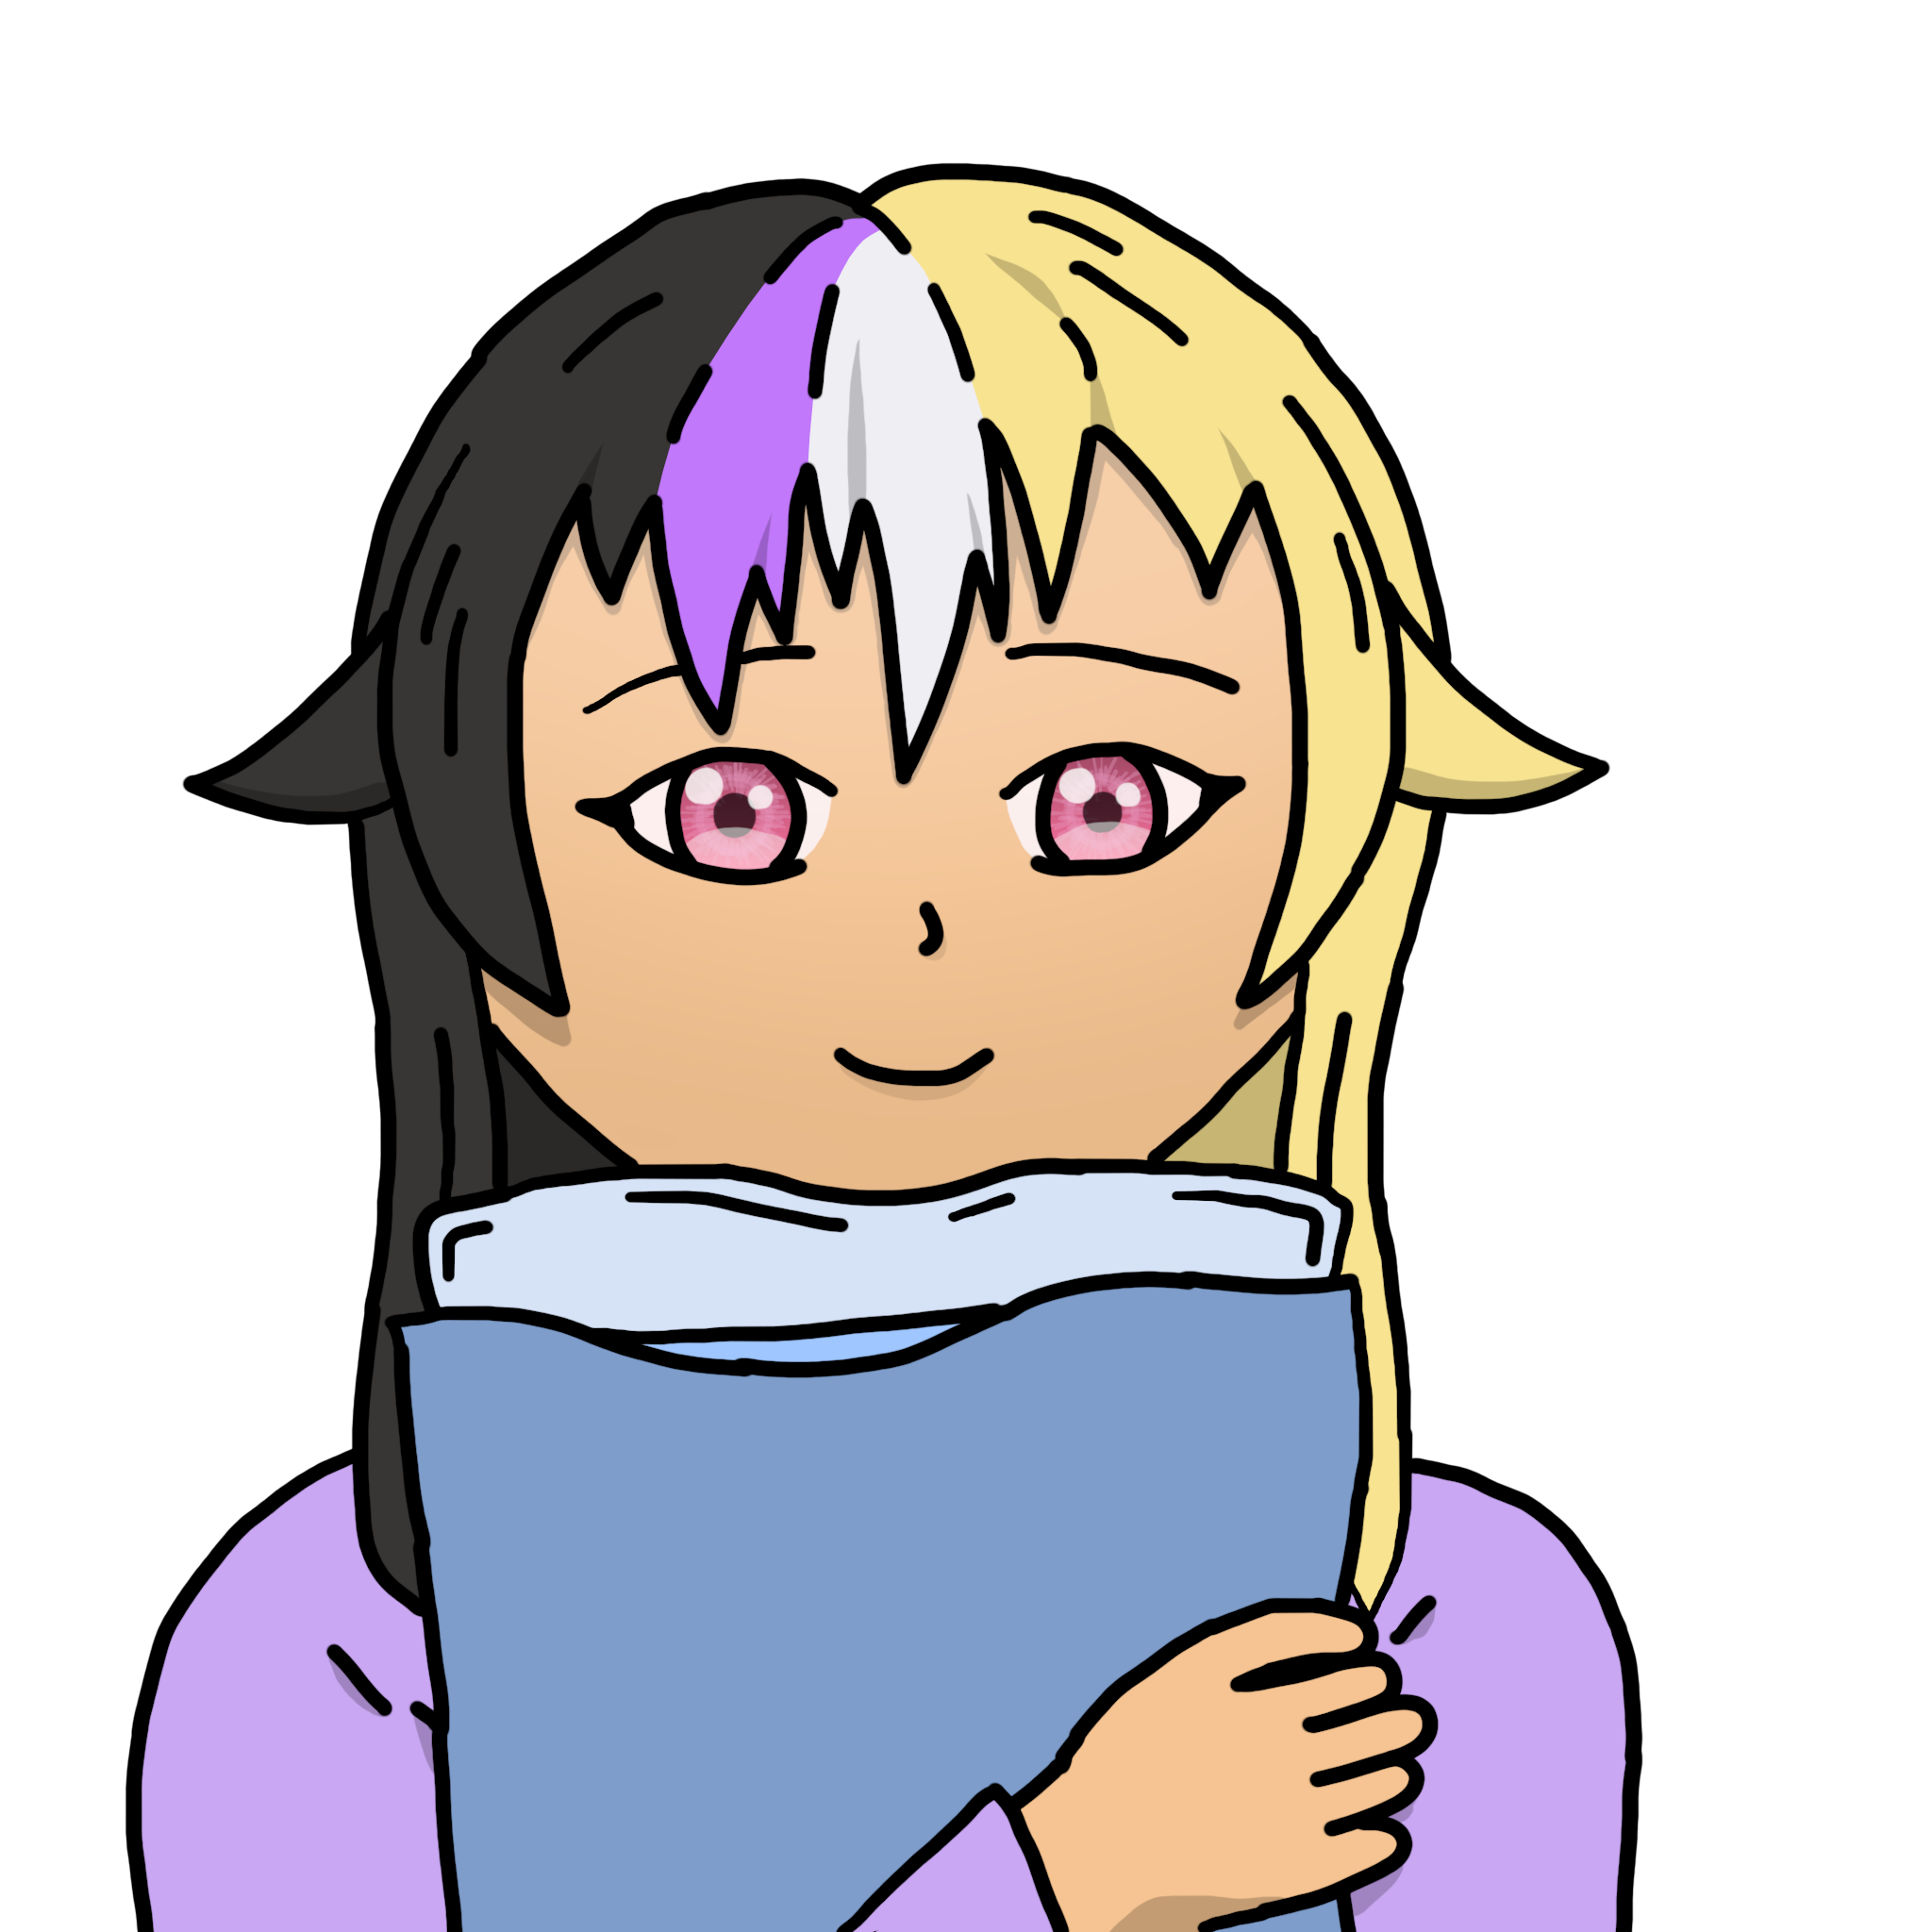 A drawing of a person with hair in nonbinary flag colours, hugging a pillow.